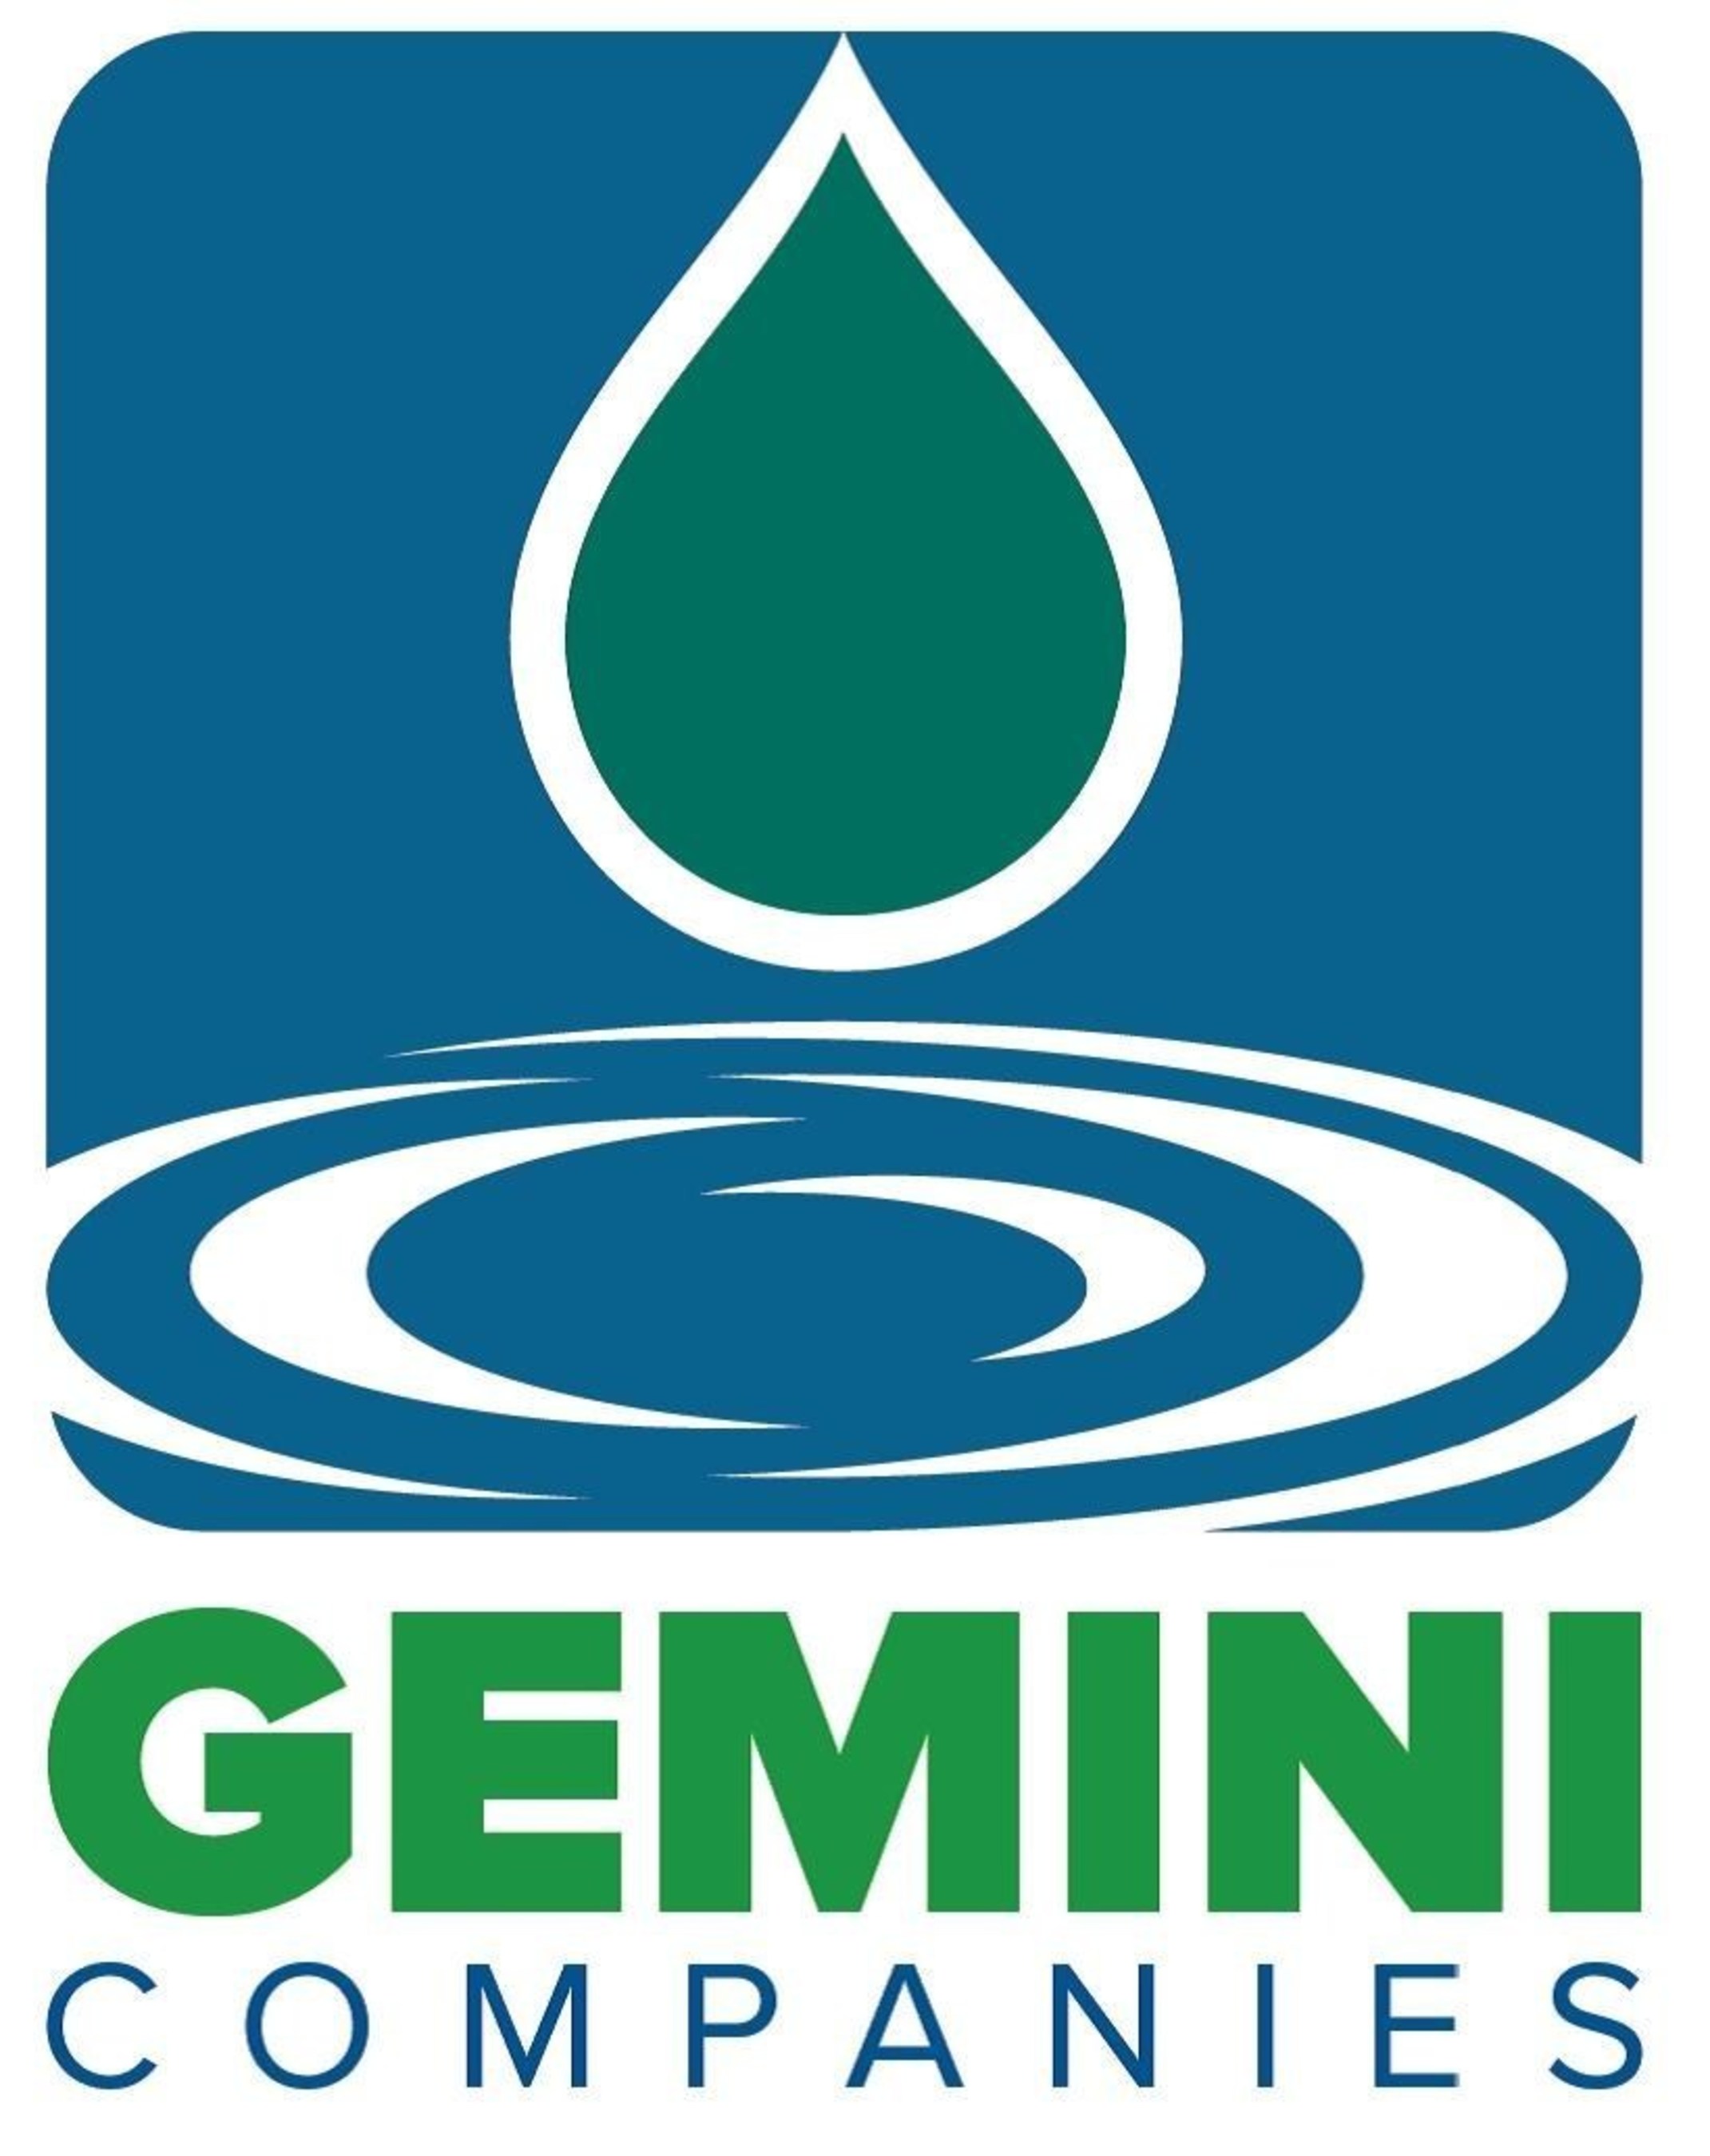 The Gemini Companies provide investment companies with a single point of access to multiple solutions for pooled investment products. The individual service firms within The Gemini Companies - Gemini Fund Services, Gemini Hedge Fund Services, Gemini Alternative Funds - were built on innovation, client partnerships and service, and their teams possess expertise in fund administration, accounting, technology, compliance and reporting. The Gemini Companies are backed by parent company NorthStar...